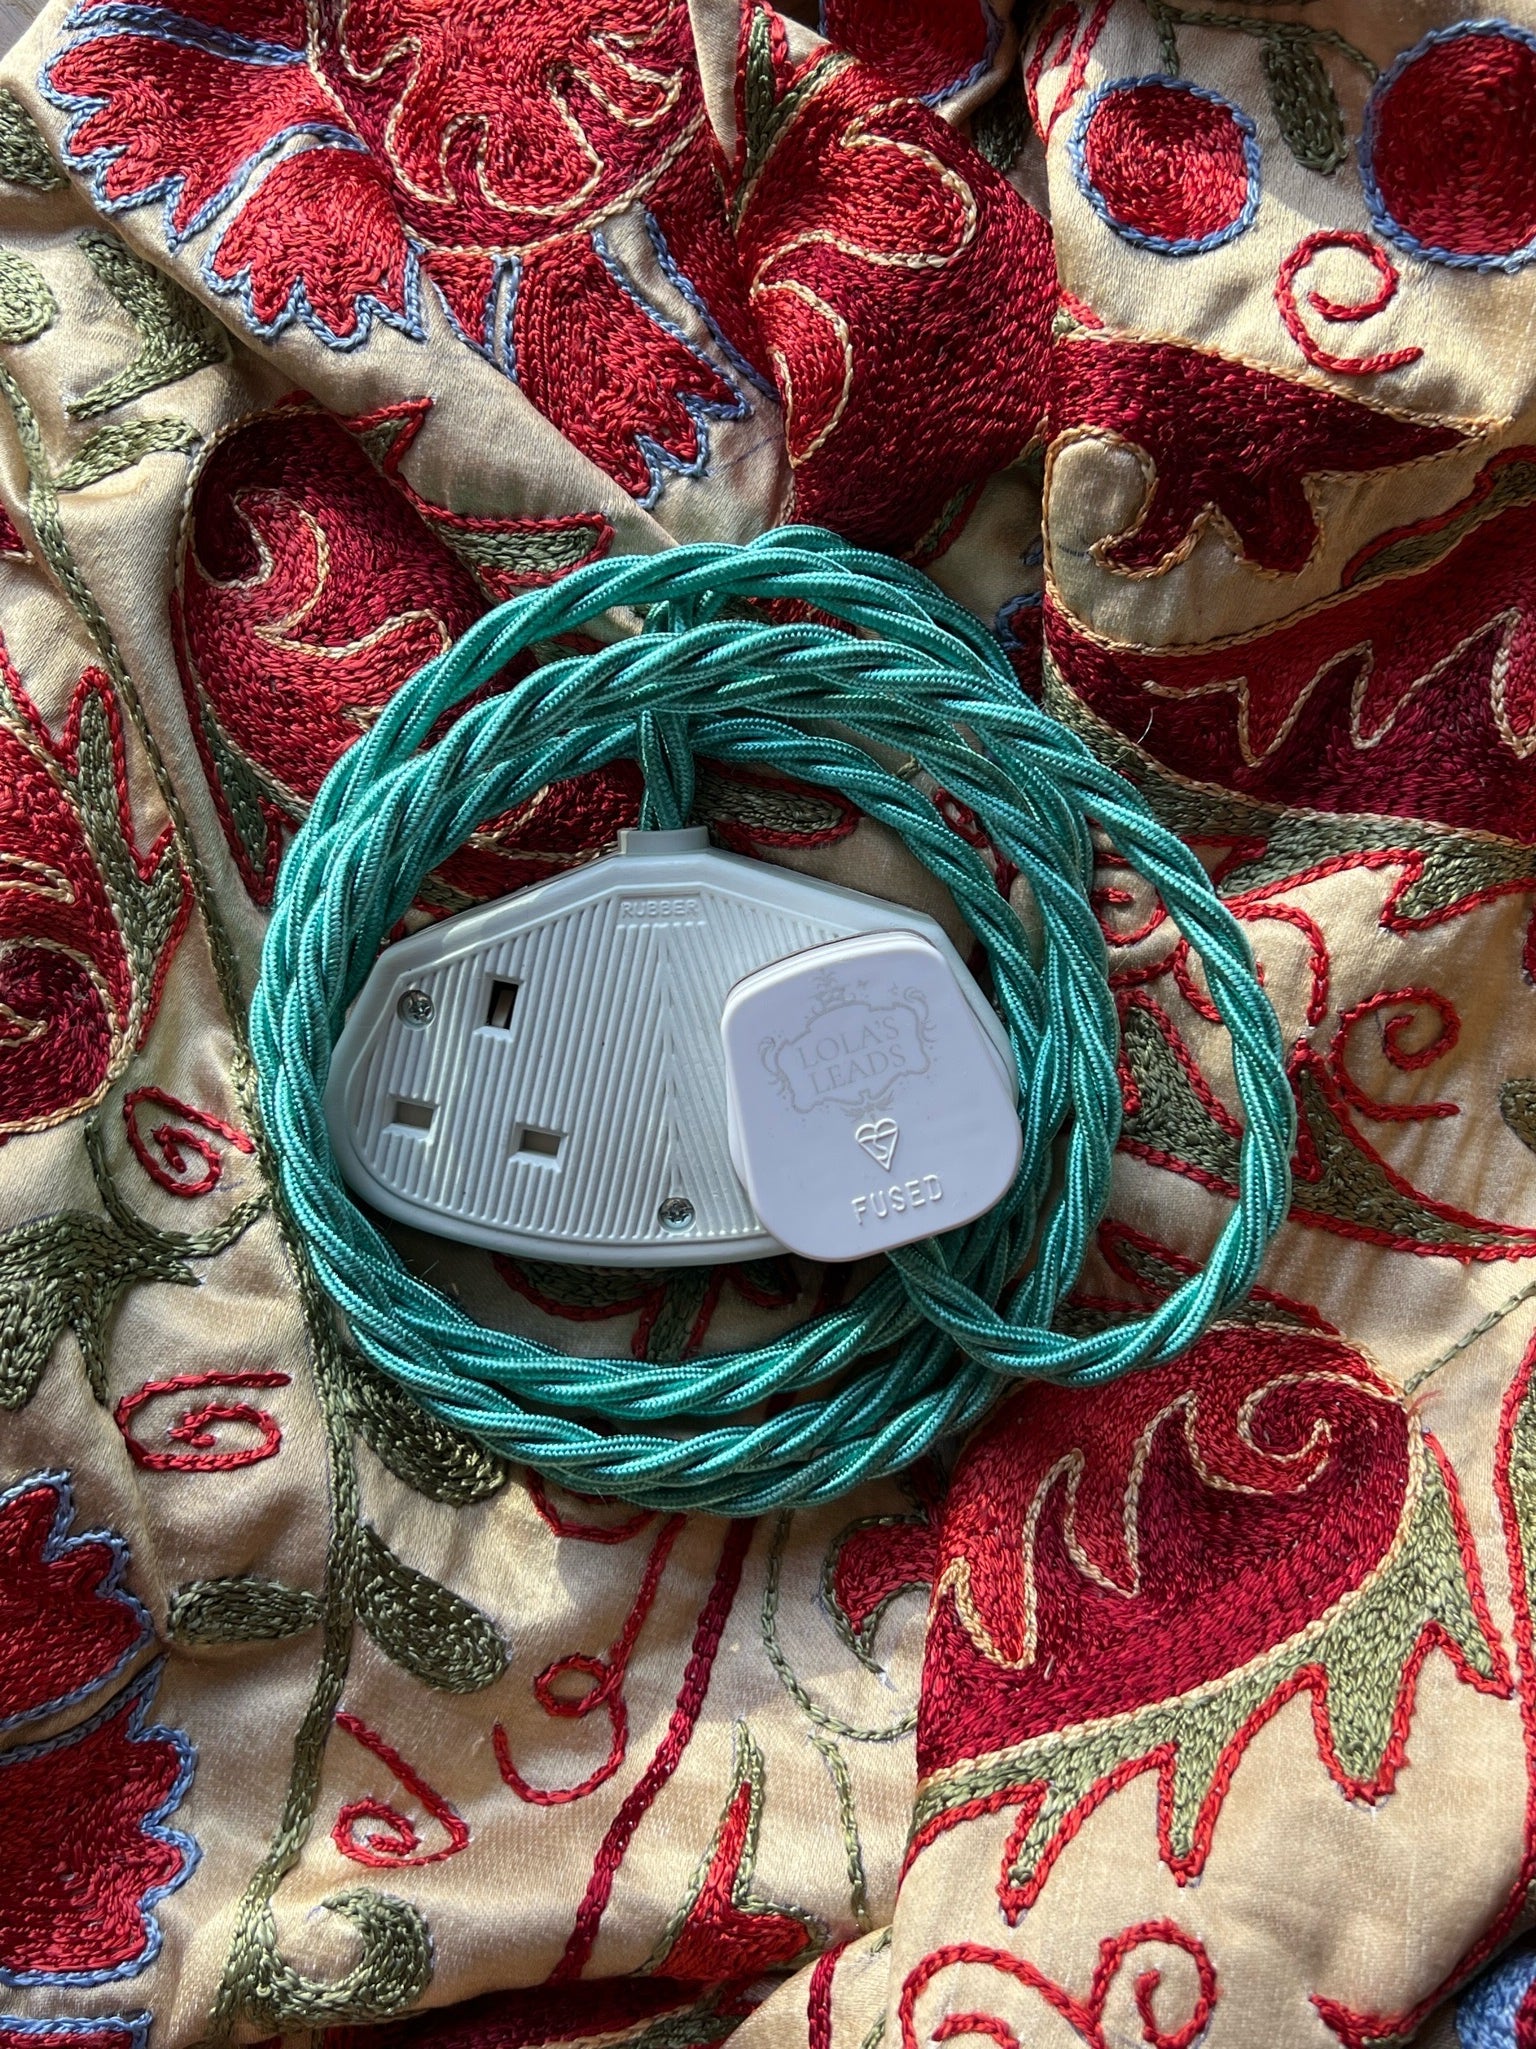 Kingfisher - Lola's Leads Fabric Extension Cable